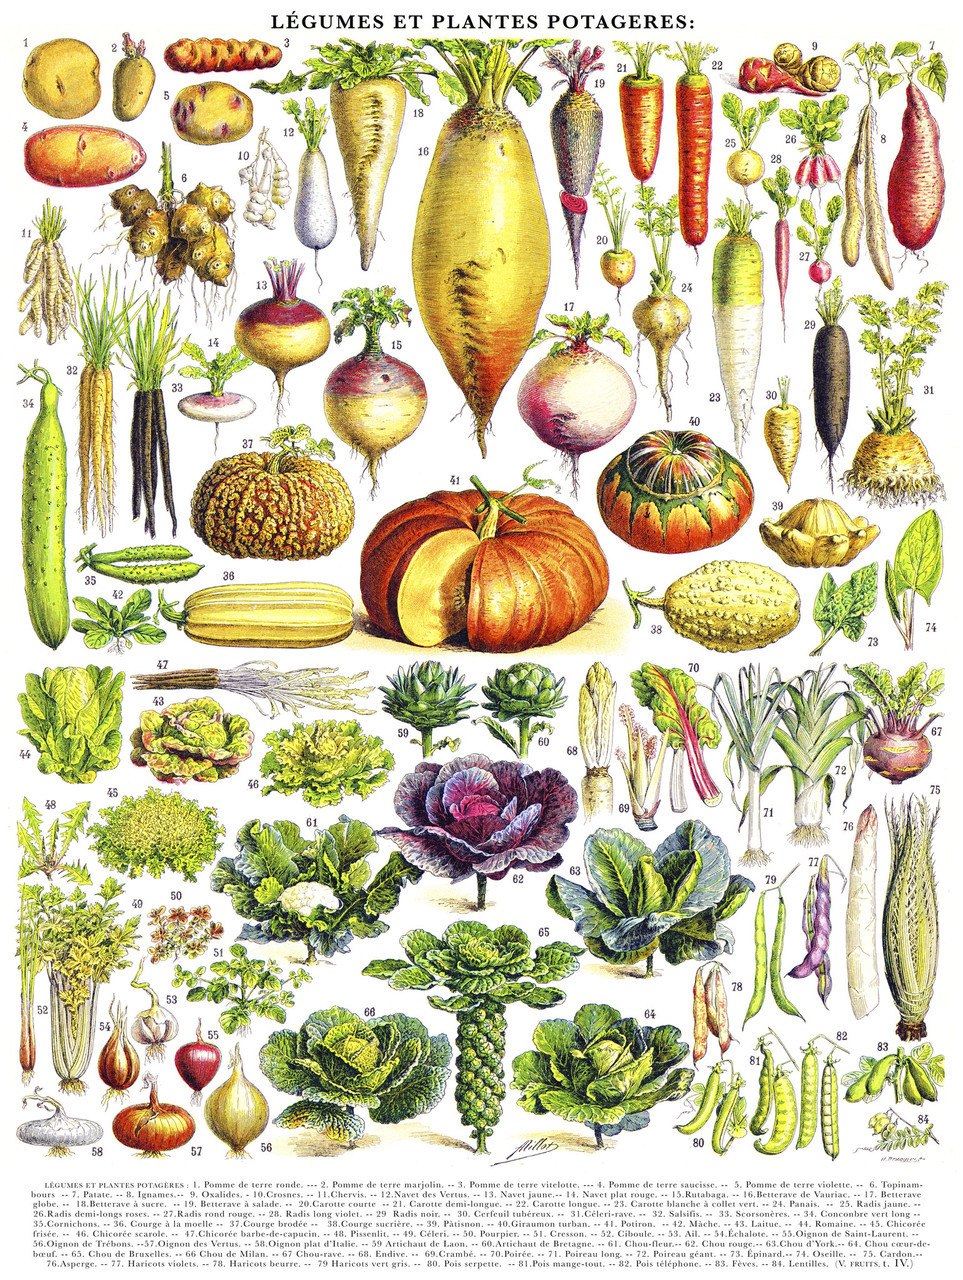 Vegetables/Legumes - 1000pc Jigsaw Puzzle by New York Puzzle Company